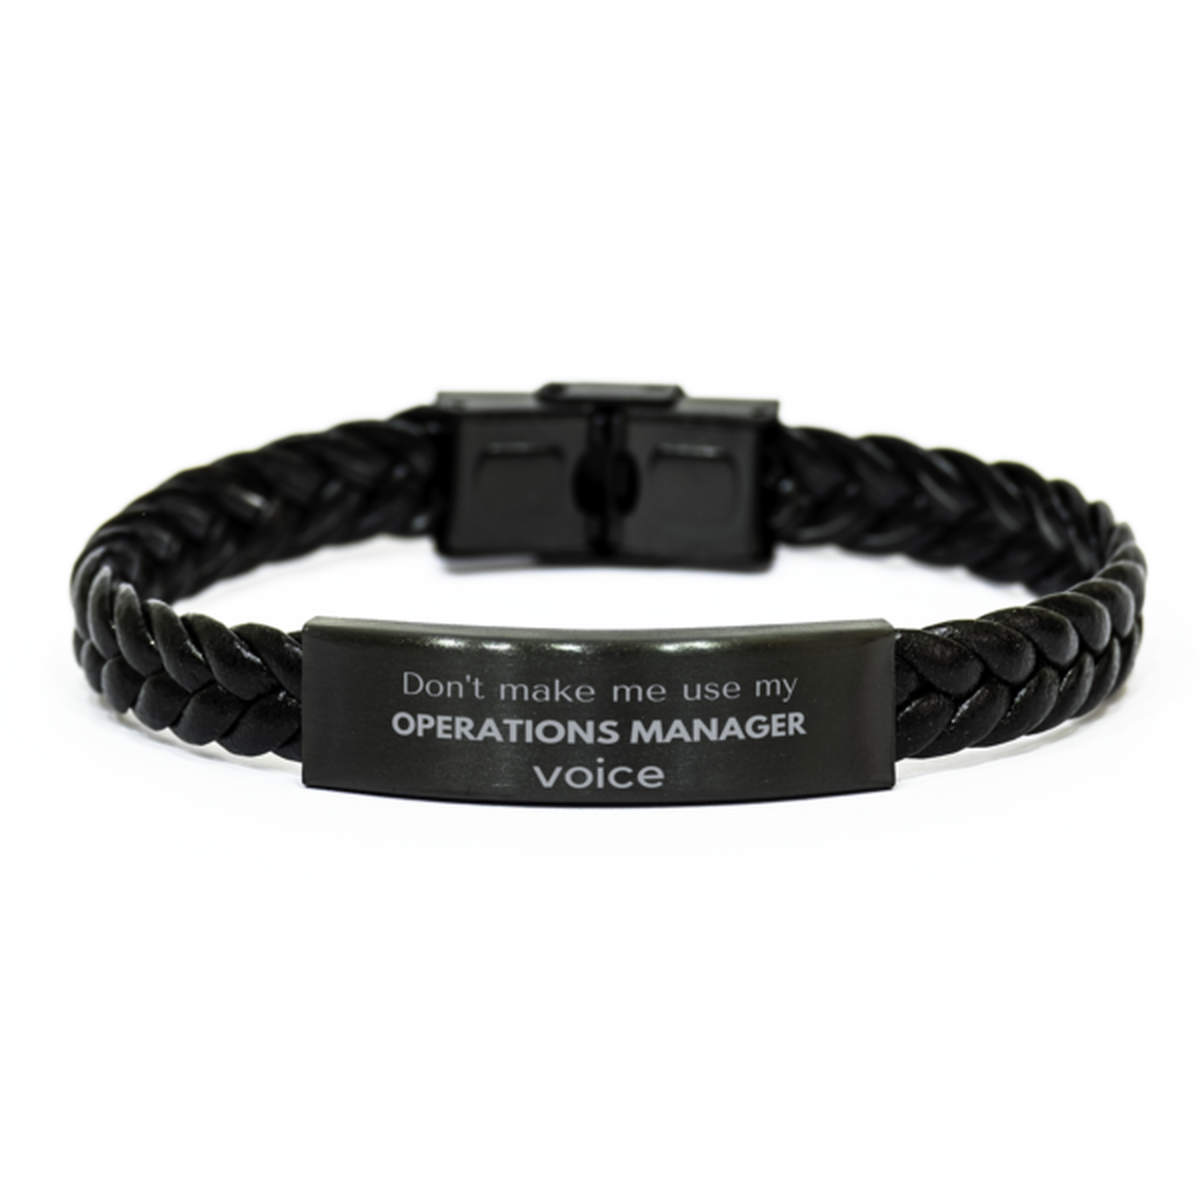 Don't make me use my Operations Manager voice, Sarcasm Operations Manager Gifts, Christmas Operations Manager Braided Leather Bracelet Birthday Unique Gifts For Operations Manager Coworkers, Men, Women, Colleague, Friends